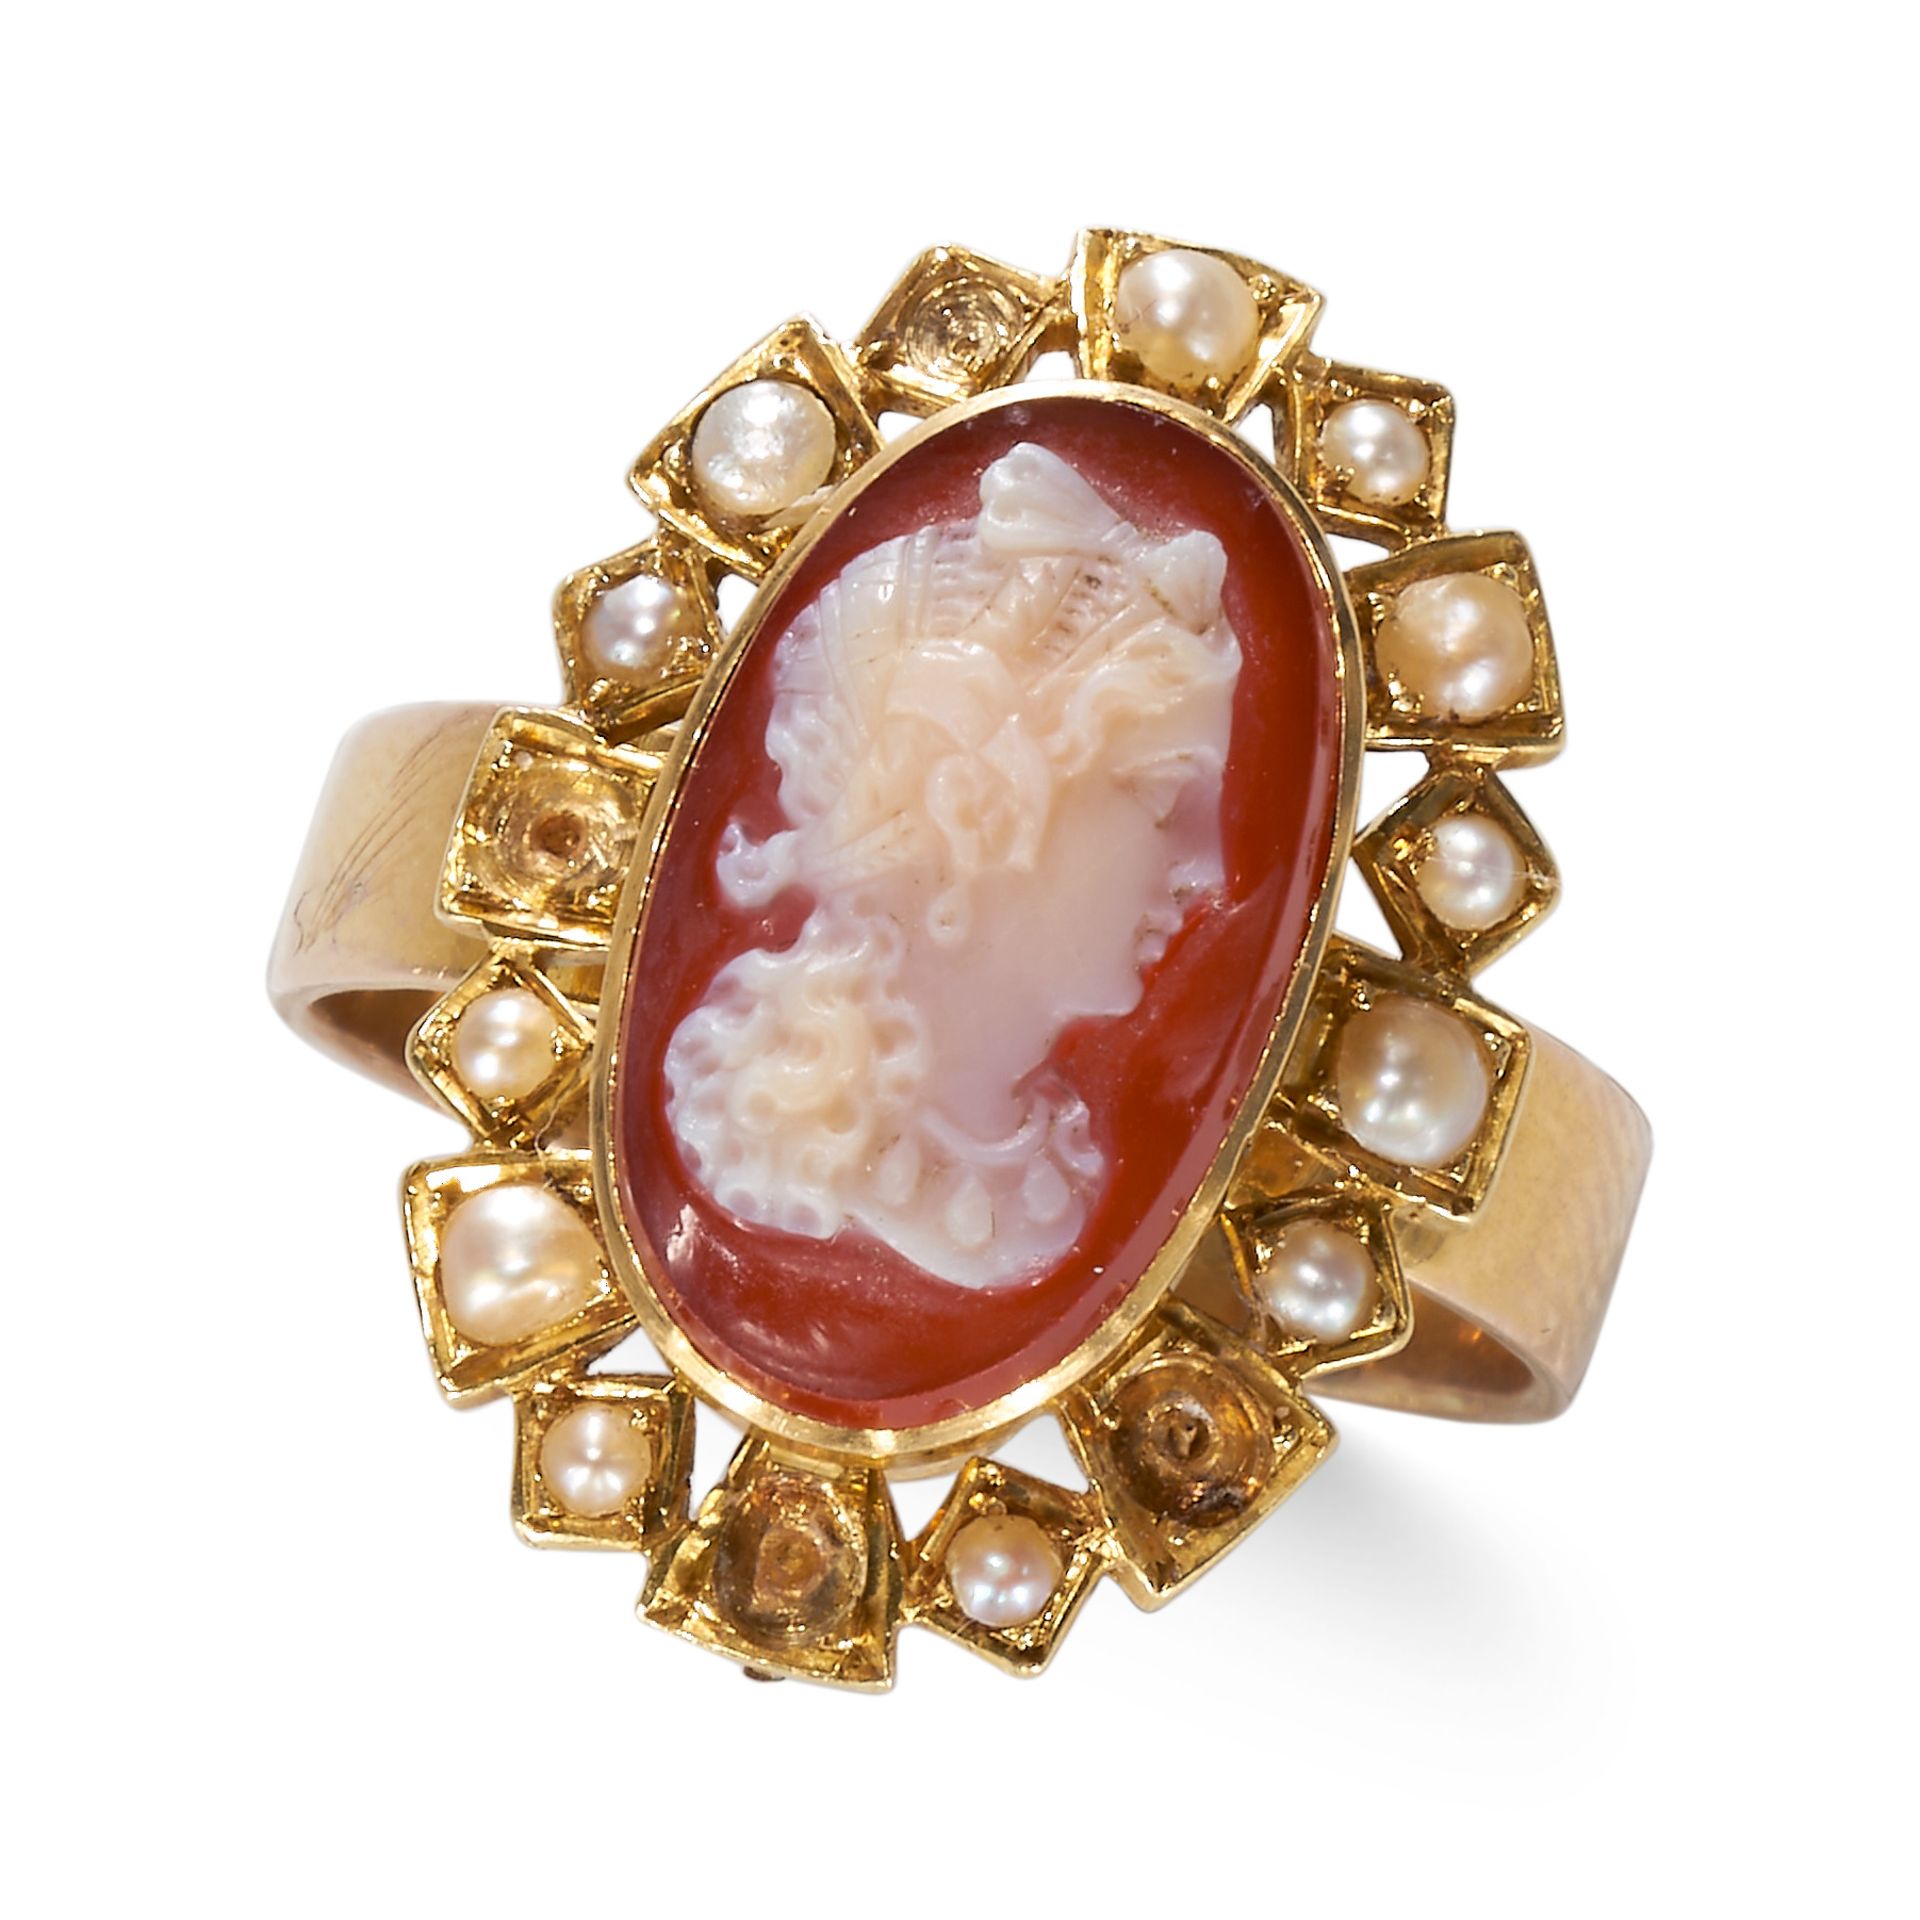 AN AGATE CAMEO PORTRAIT RING WITH SEED PEARLS.